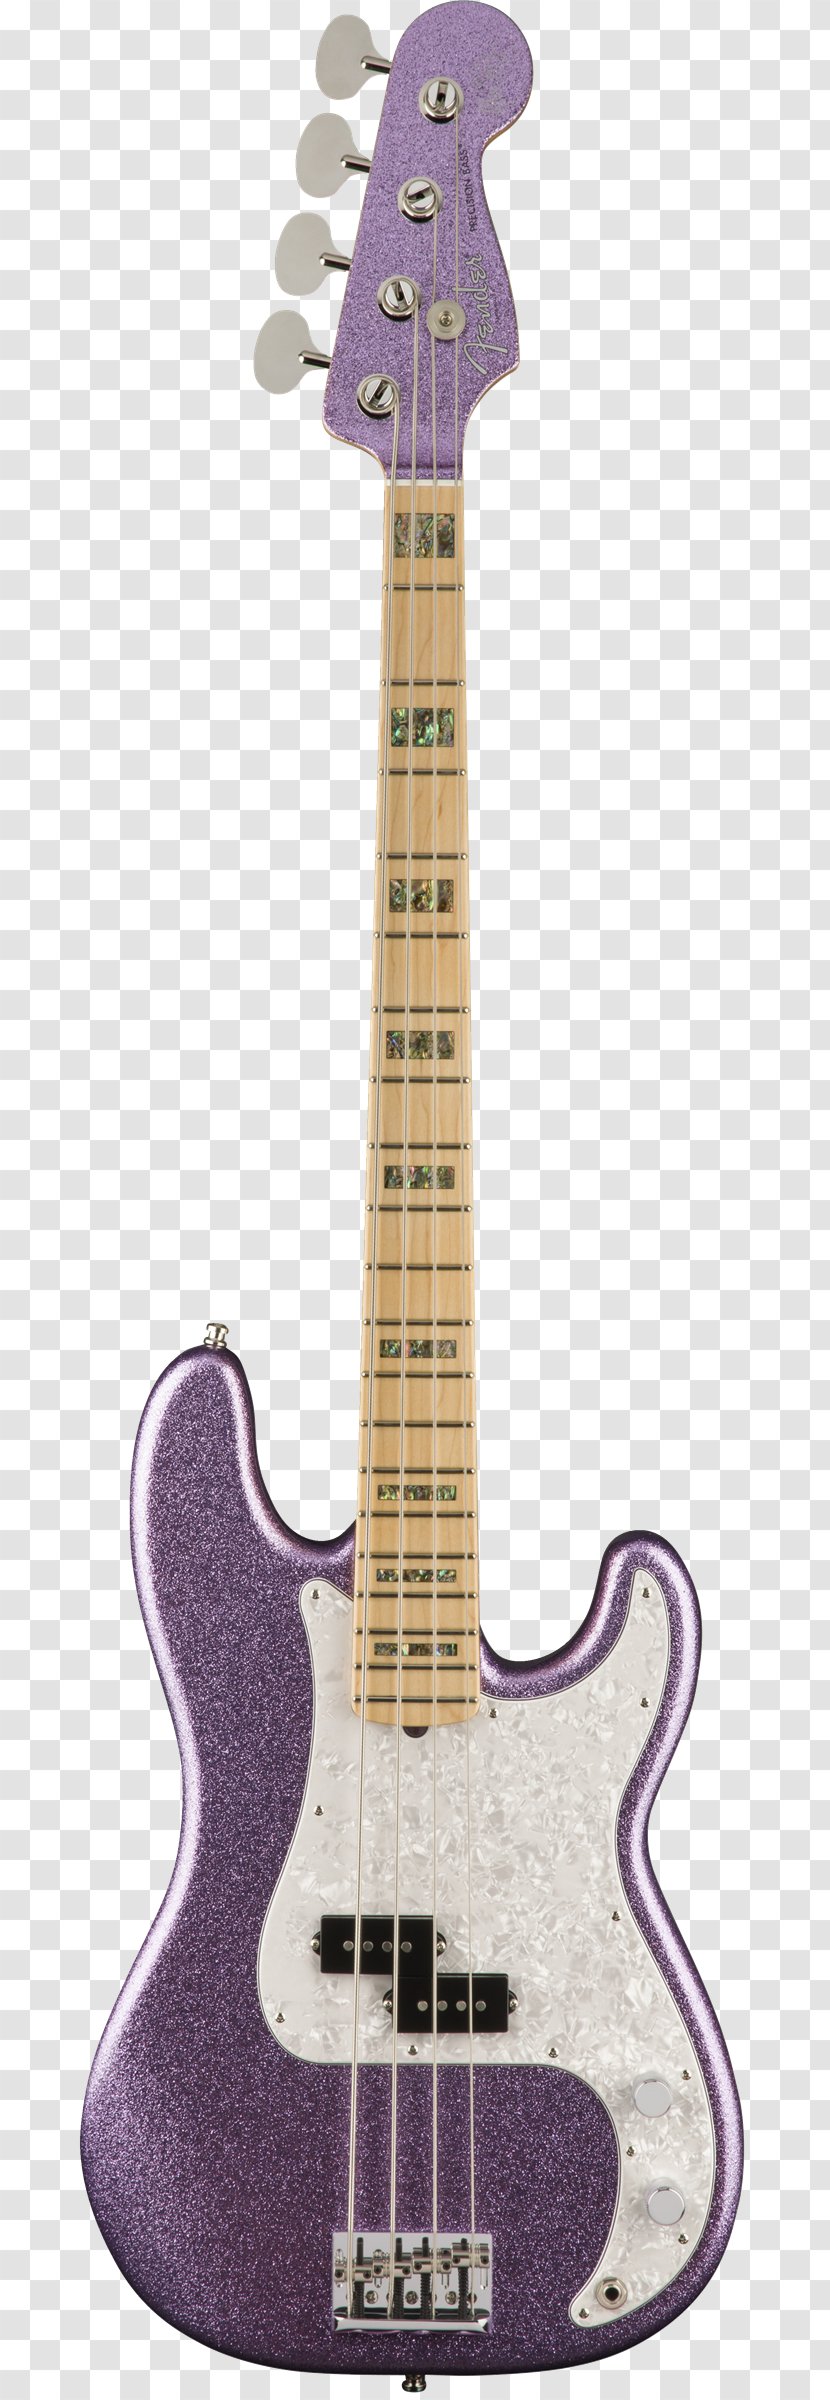 Fender Precision Bass Mustang Jazz Musical Instruments Corporation Guitar - Tree - Stage Truss Transparent PNG